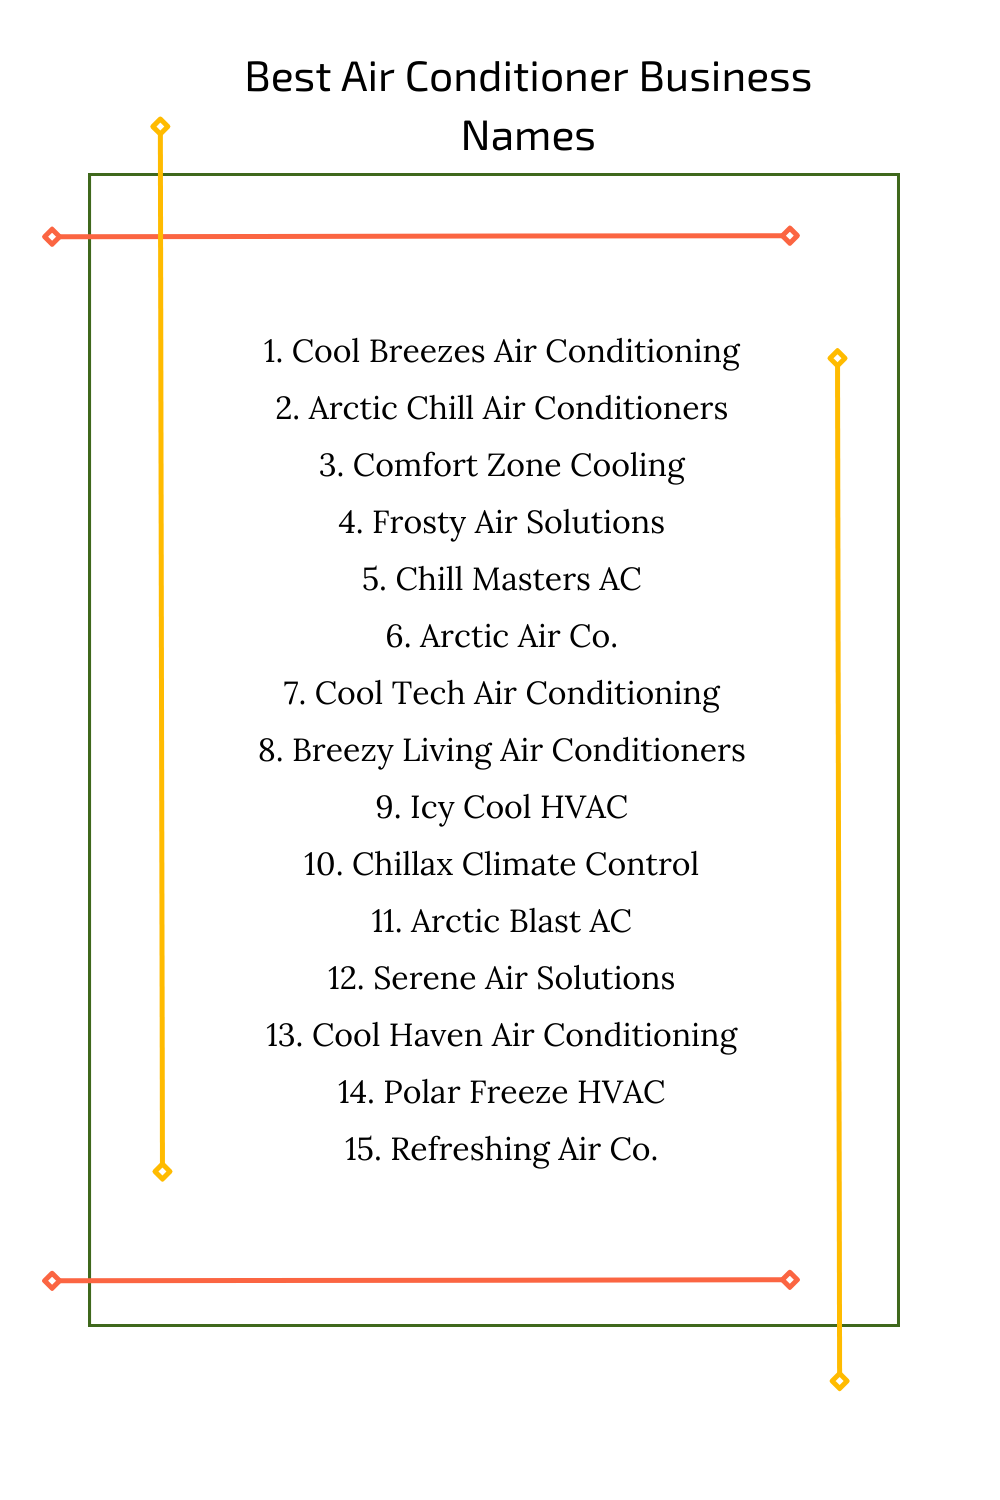 Best Air Conditioner Business Names